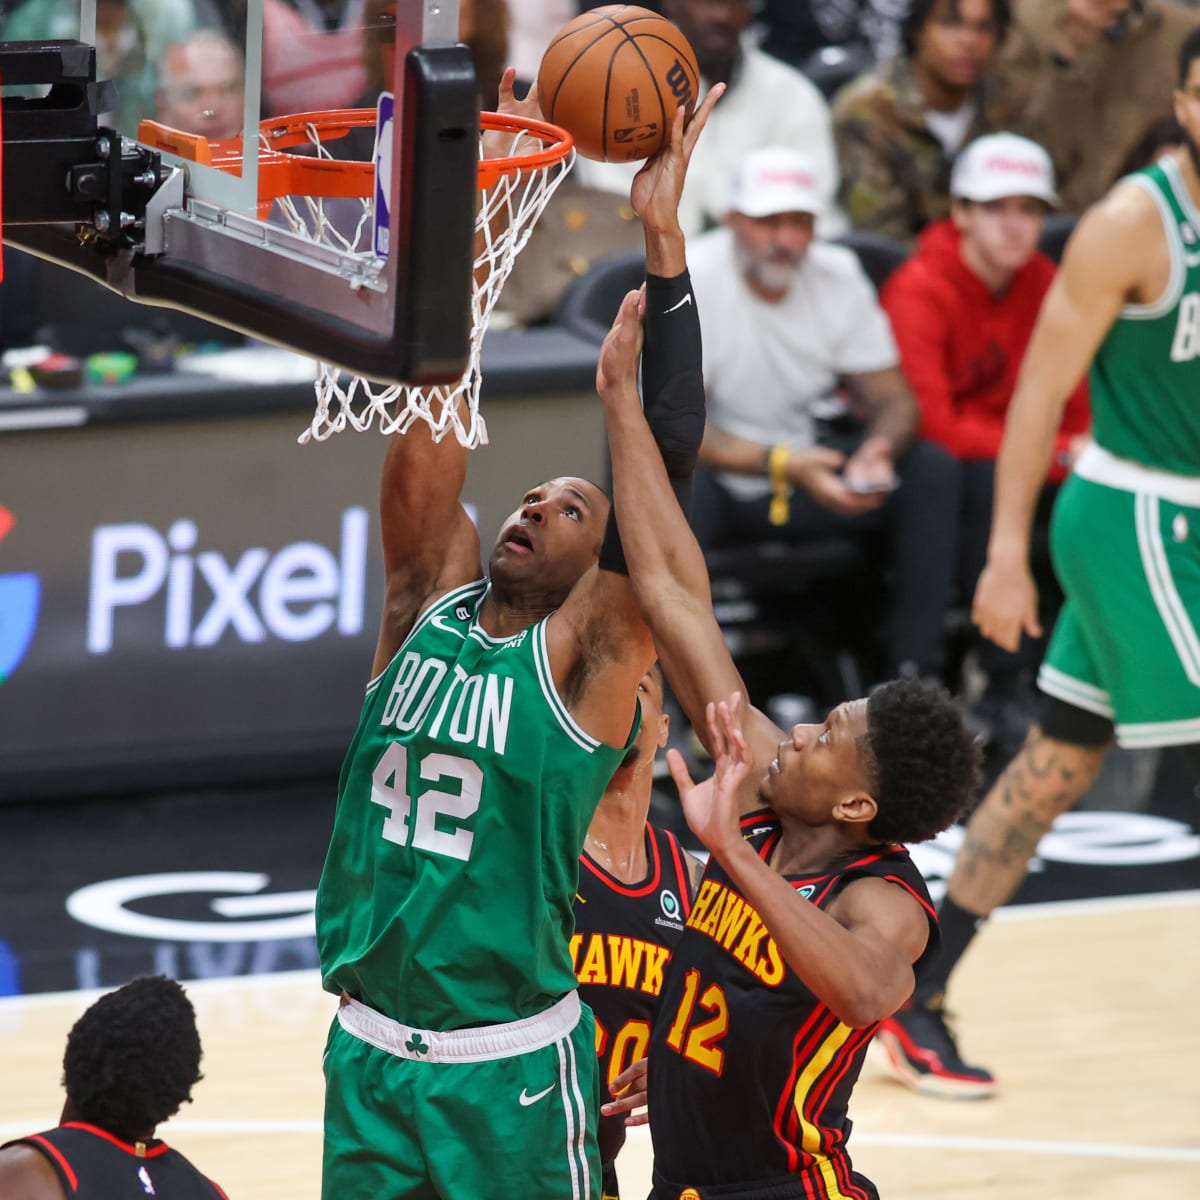 Al Horford brings his unselfish game to Celtics